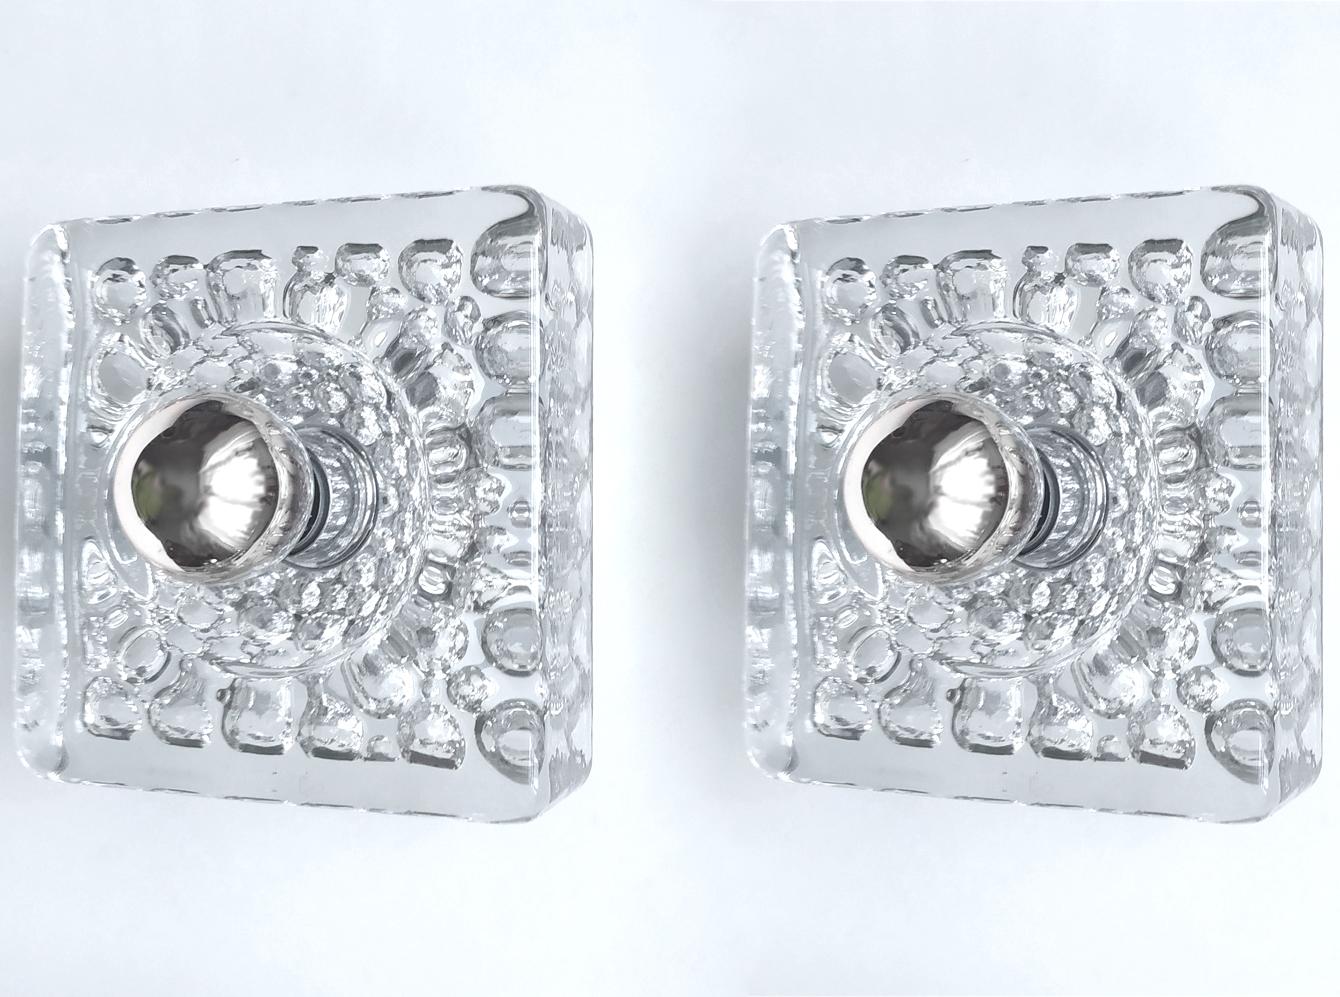 Pair of textured blown glass sconces.
Germany, 1960s - 1970s
Lamp sockets: 1.